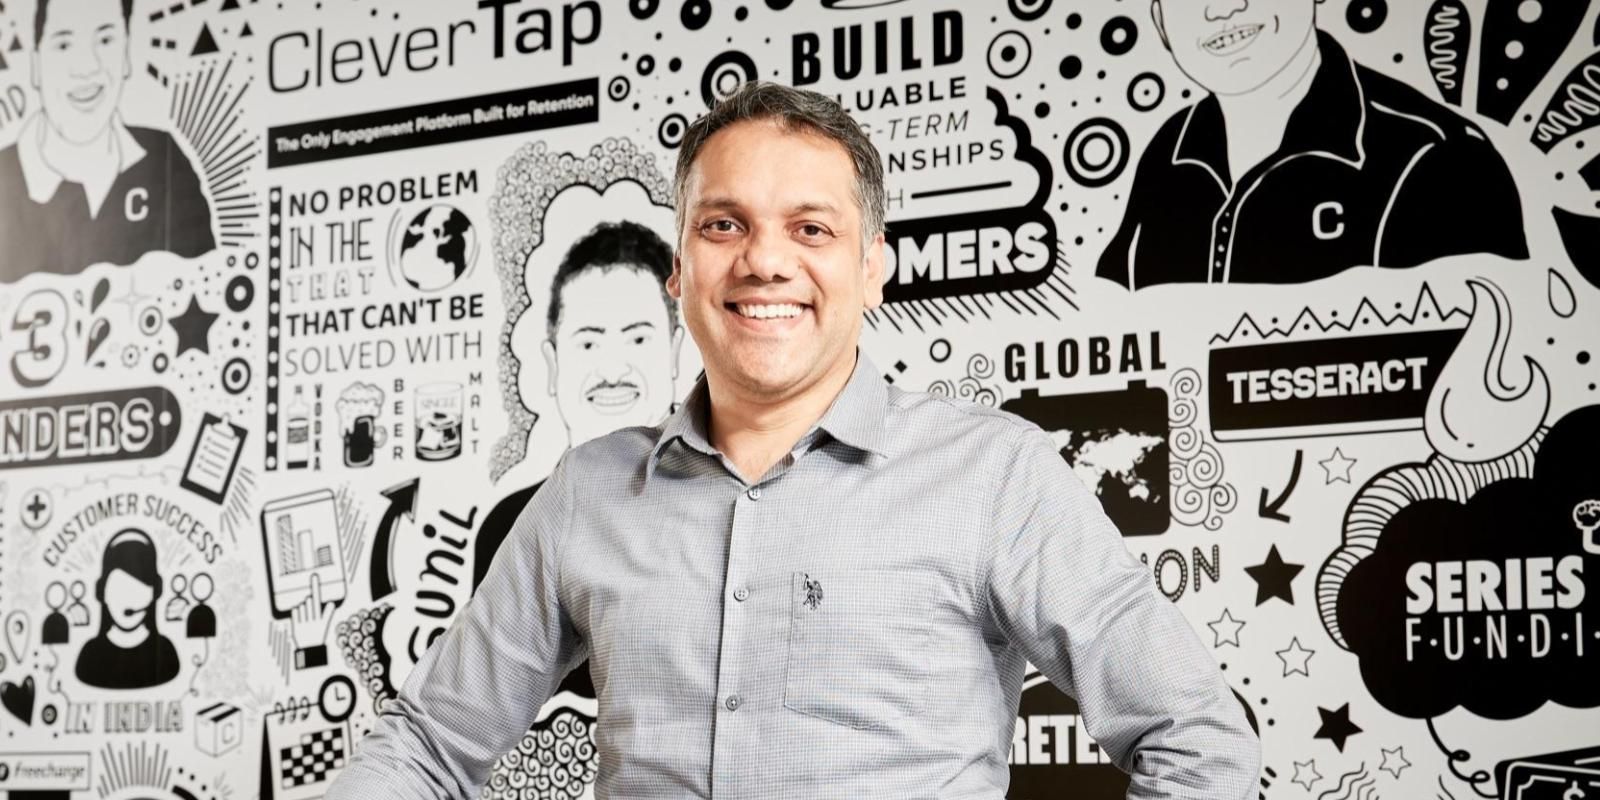 Why Anand Jain and CleverTap are unfazed by funding winter